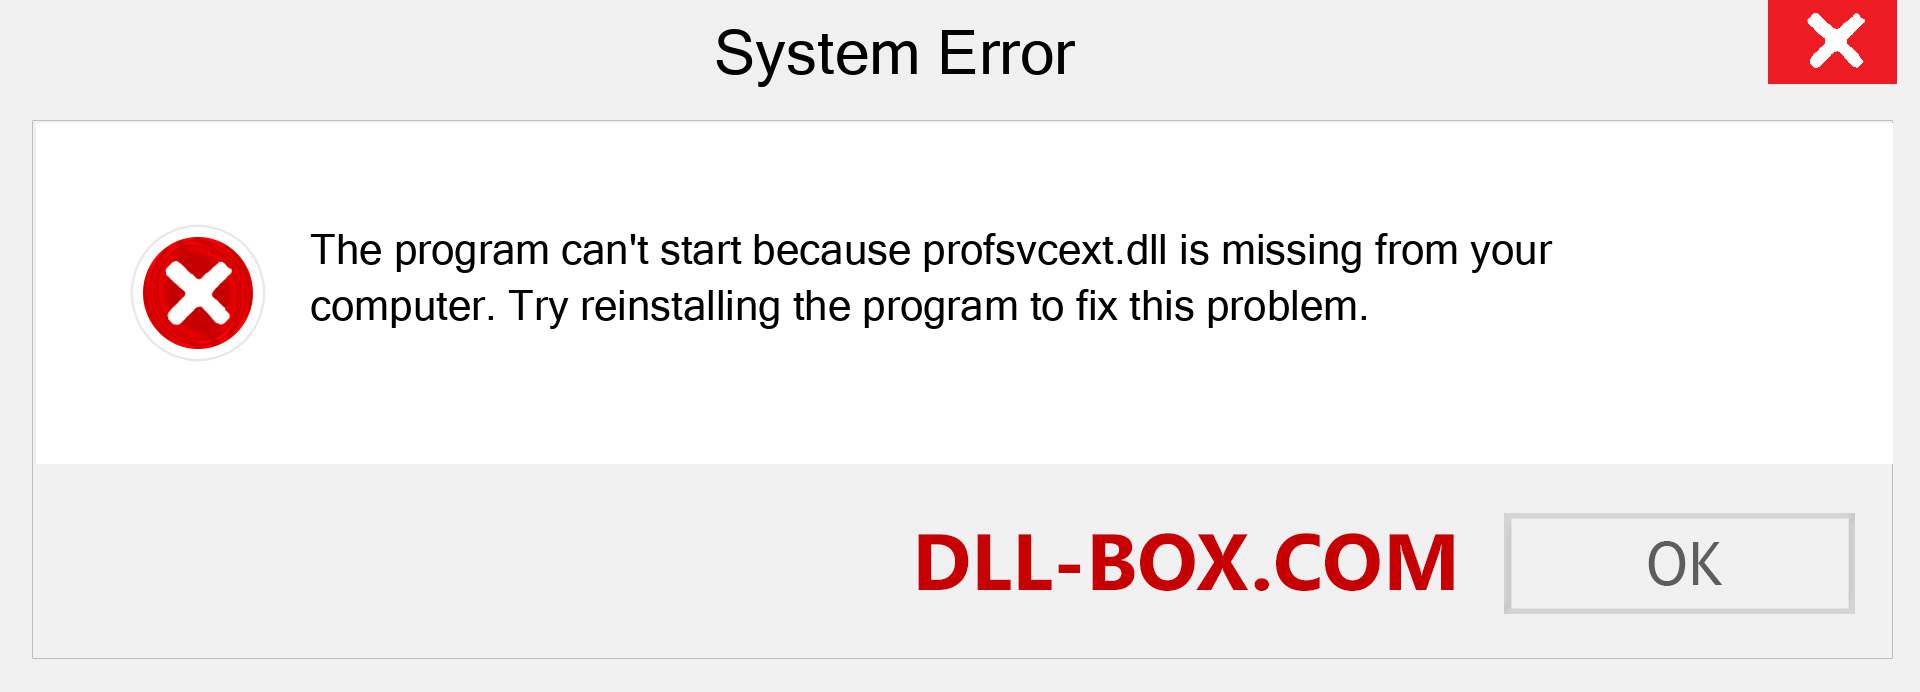  profsvcext.dll file is missing?. Download for Windows 7, 8, 10 - Fix  profsvcext dll Missing Error on Windows, photos, images